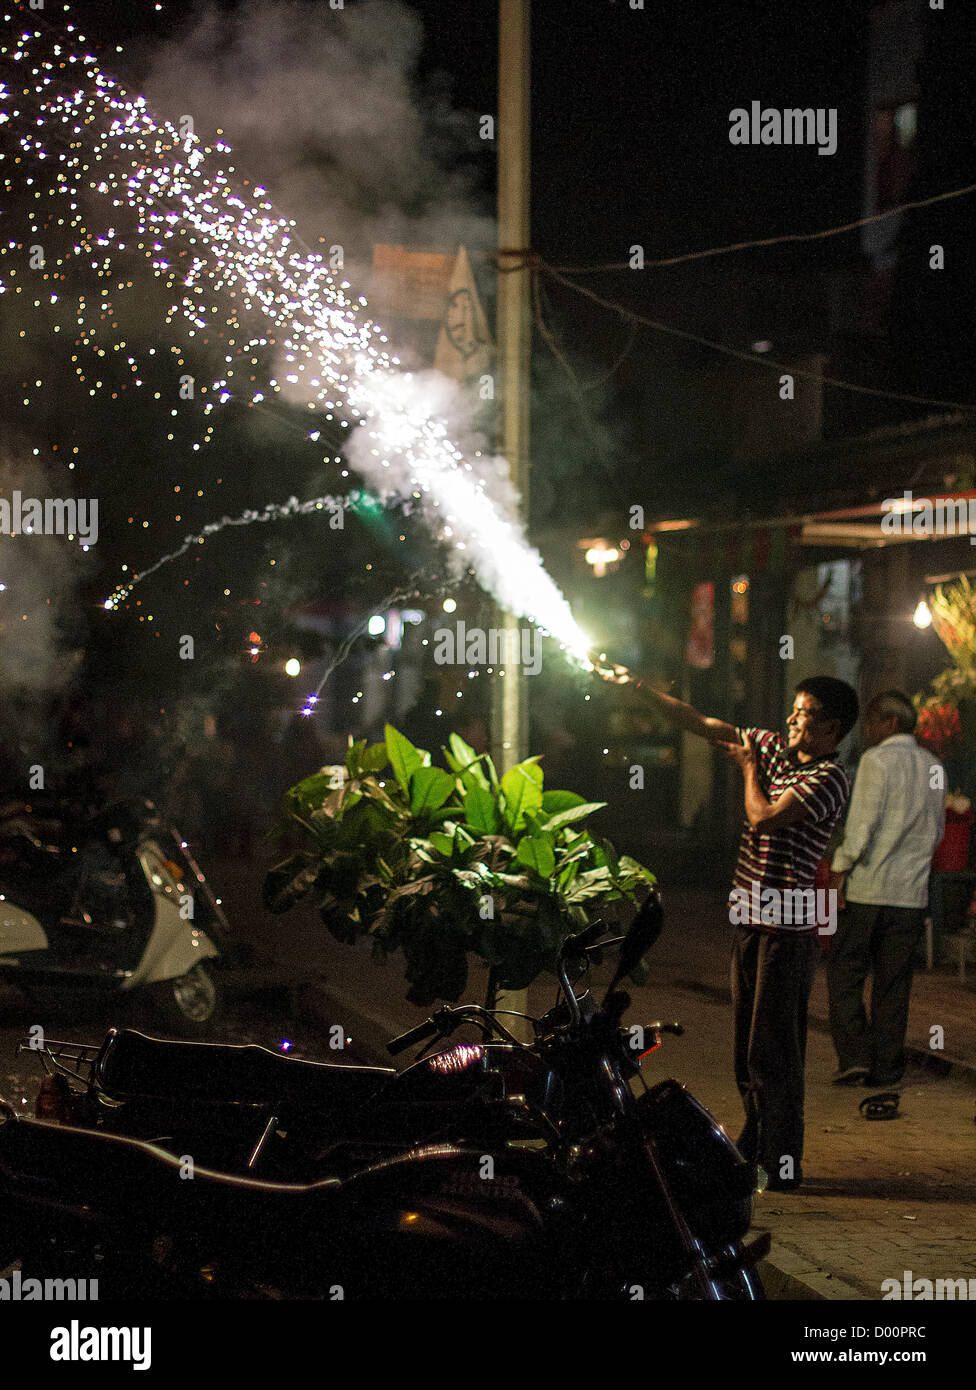 India celebrates Diwali, the festival of light. People all over India set off firecrackers and fireworks in celebration. Here a man sets light to a 'Phooljhari' roughly translated as 'flower stick'. Stock Photo